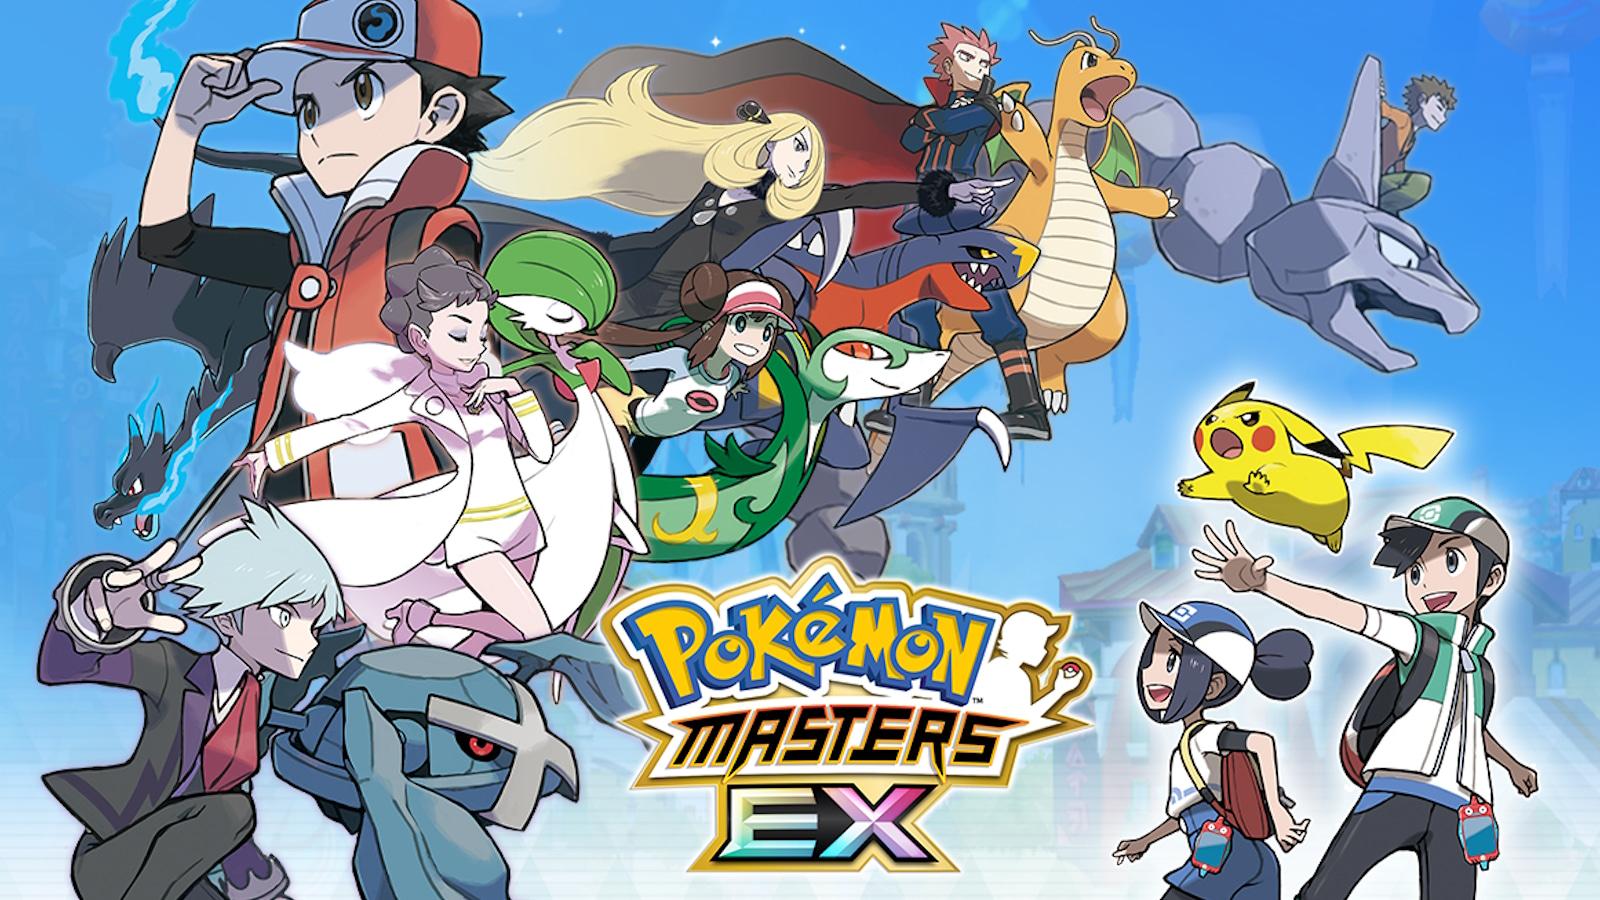 Pokemon Masters EX promotional art featuring a range of sync pairs alongside the game's logo.